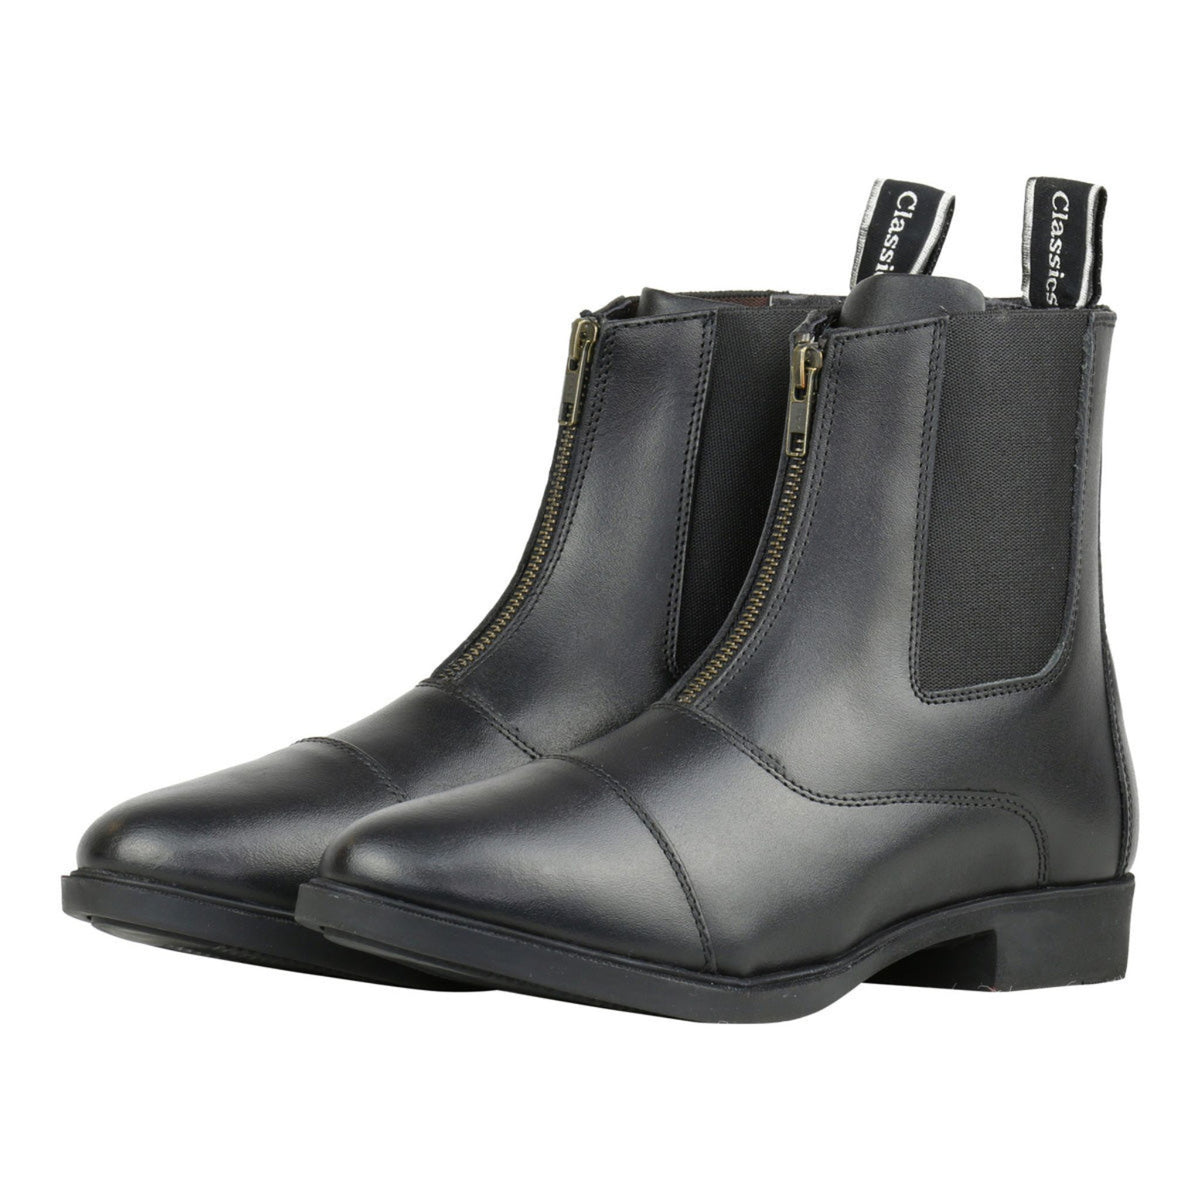 Black jodhpur boot with zip front and tabs at back.